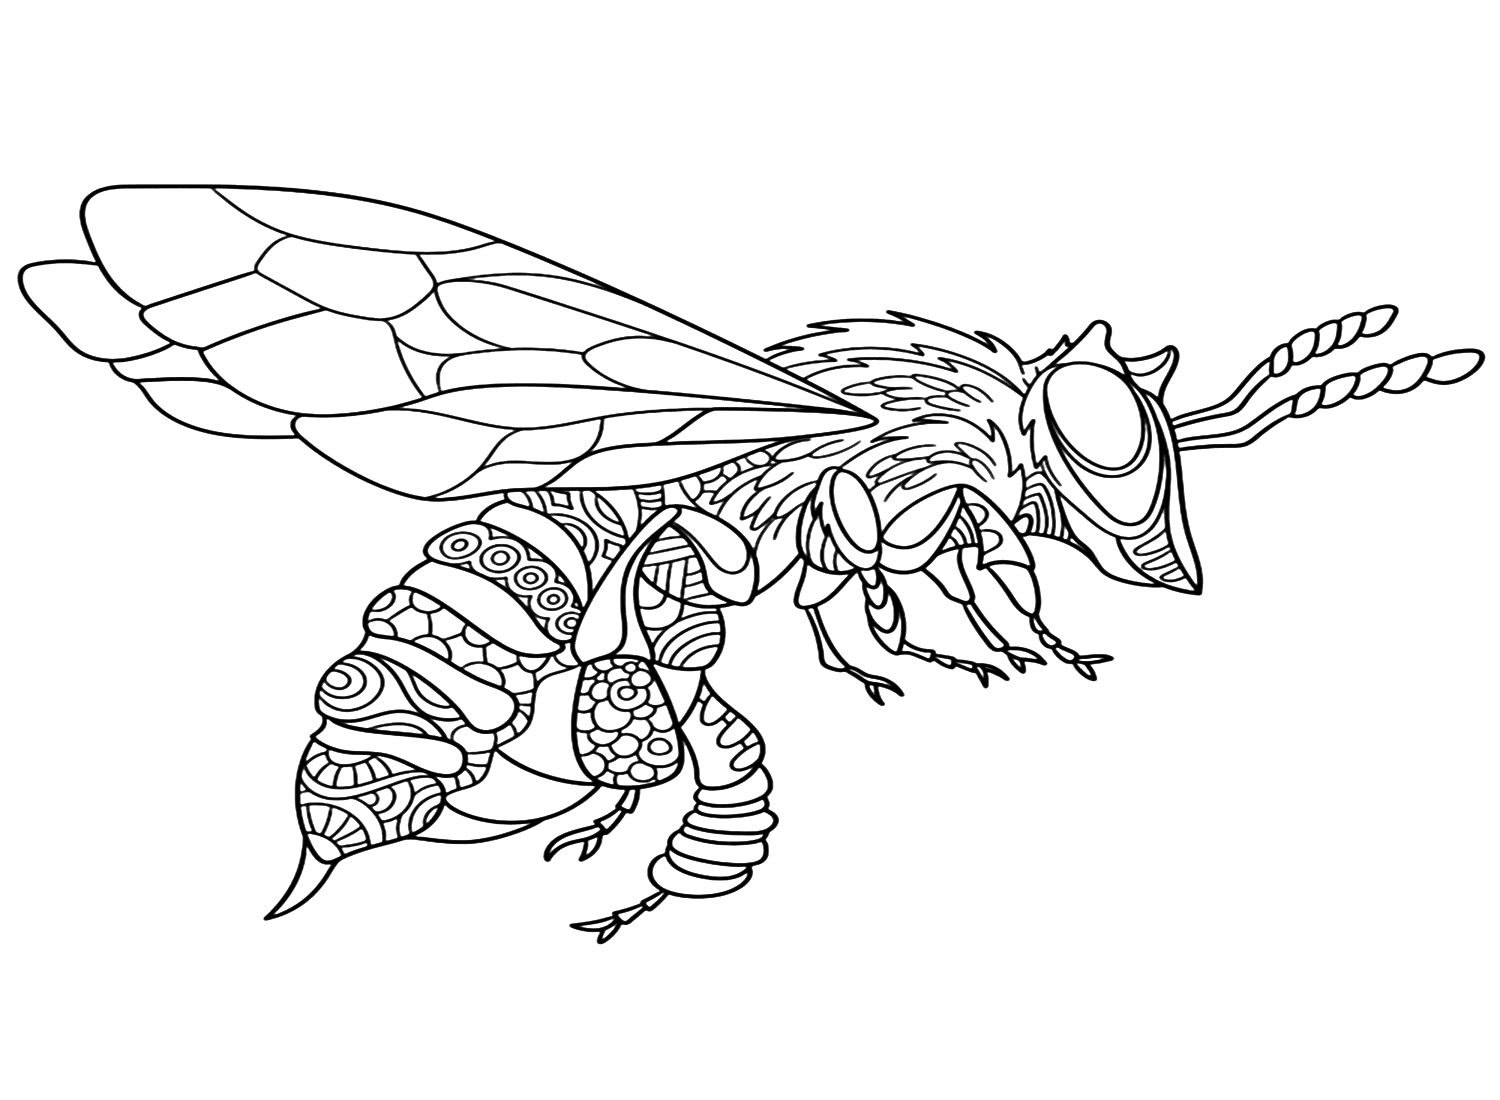 Zentangle Wasp Coloring Page from Wasp